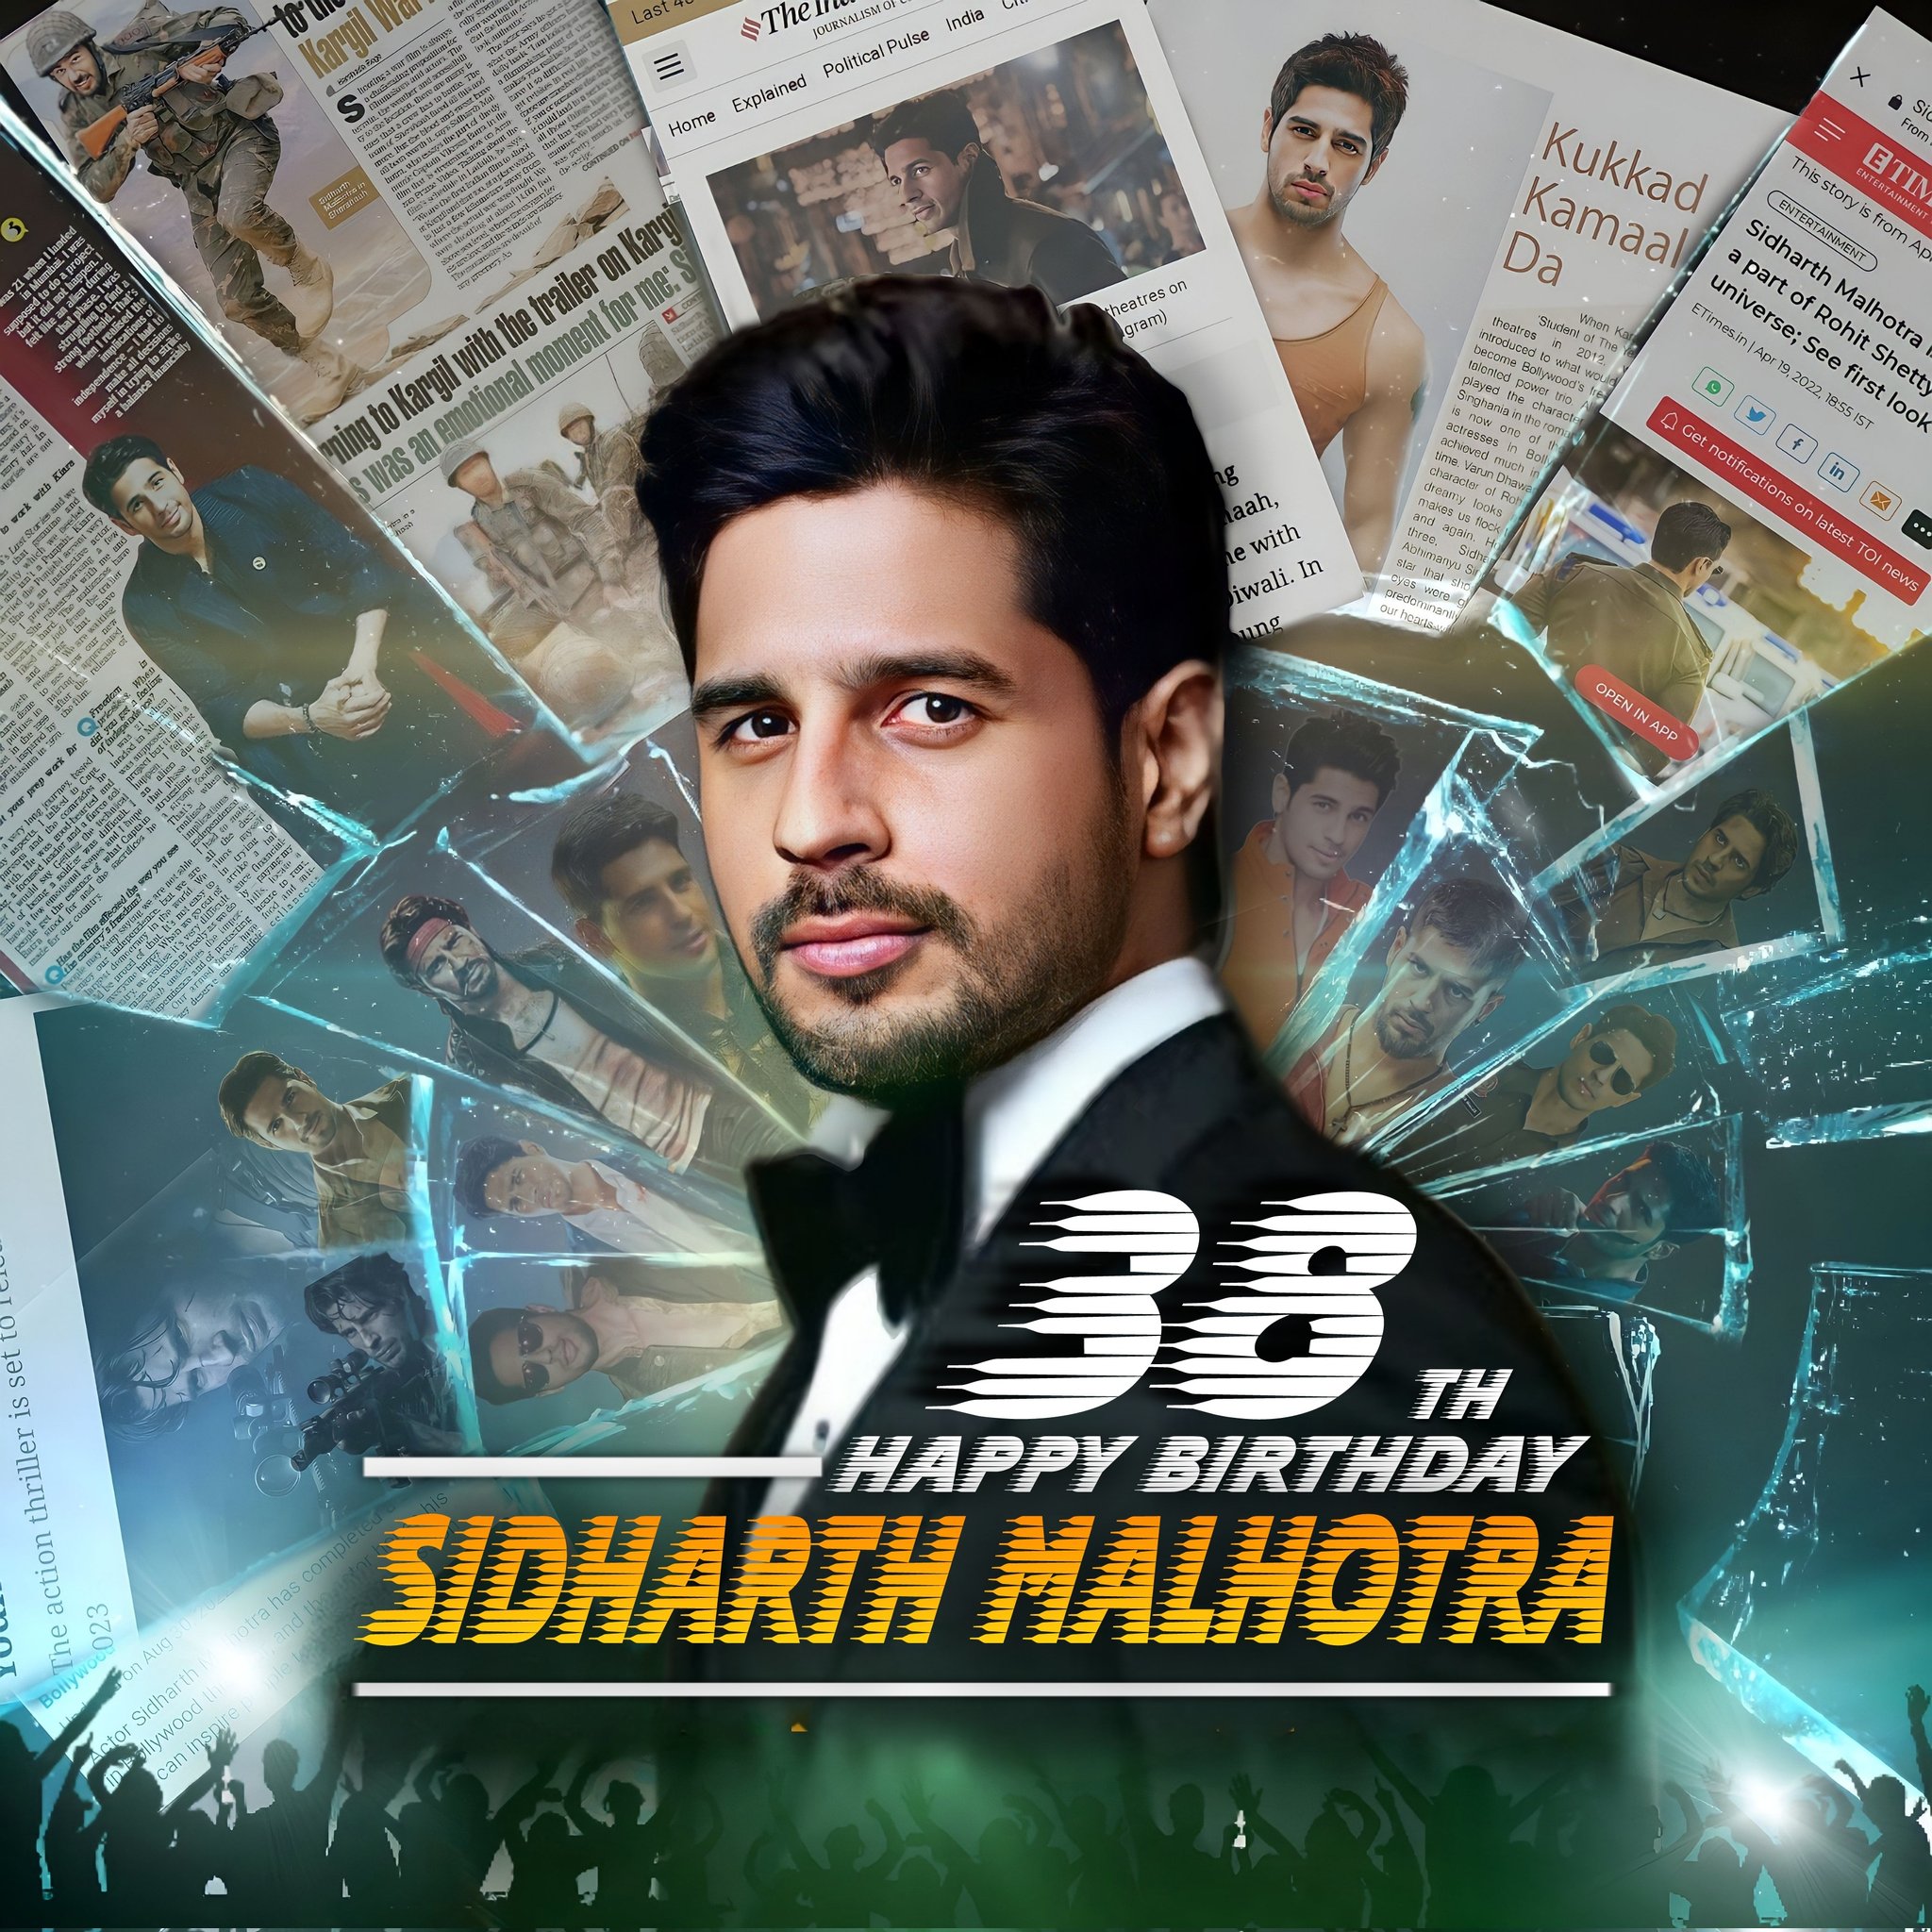 Wishing a very Happy Birthday to the handsome hunk, Siddharth Malhotra. Have a great year ahead! 